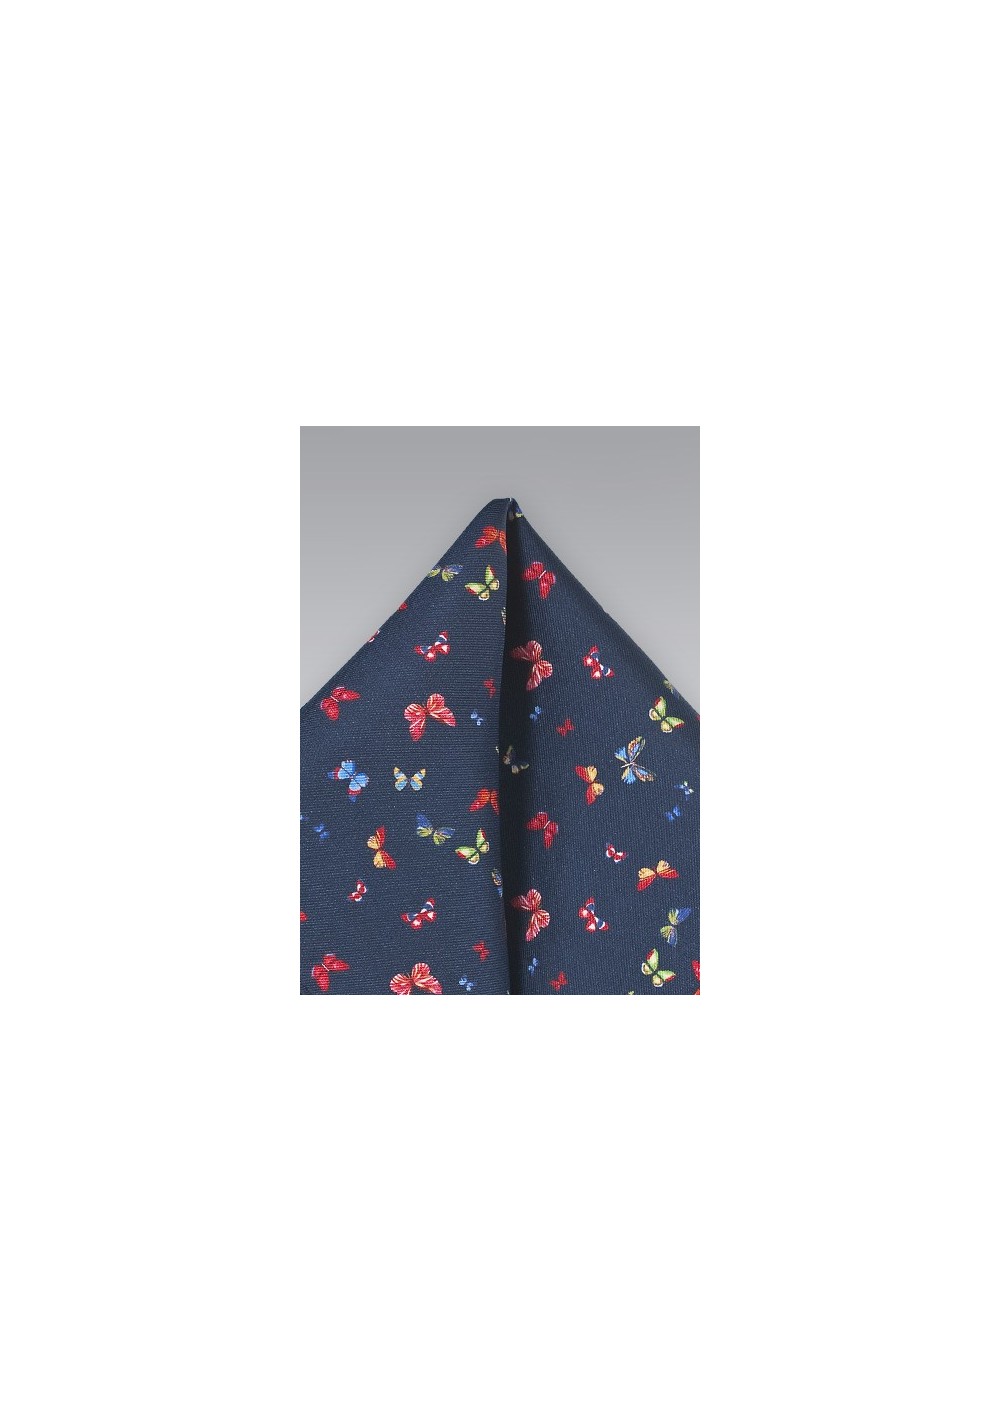 Fun Silk Pocket Square with Butterflies